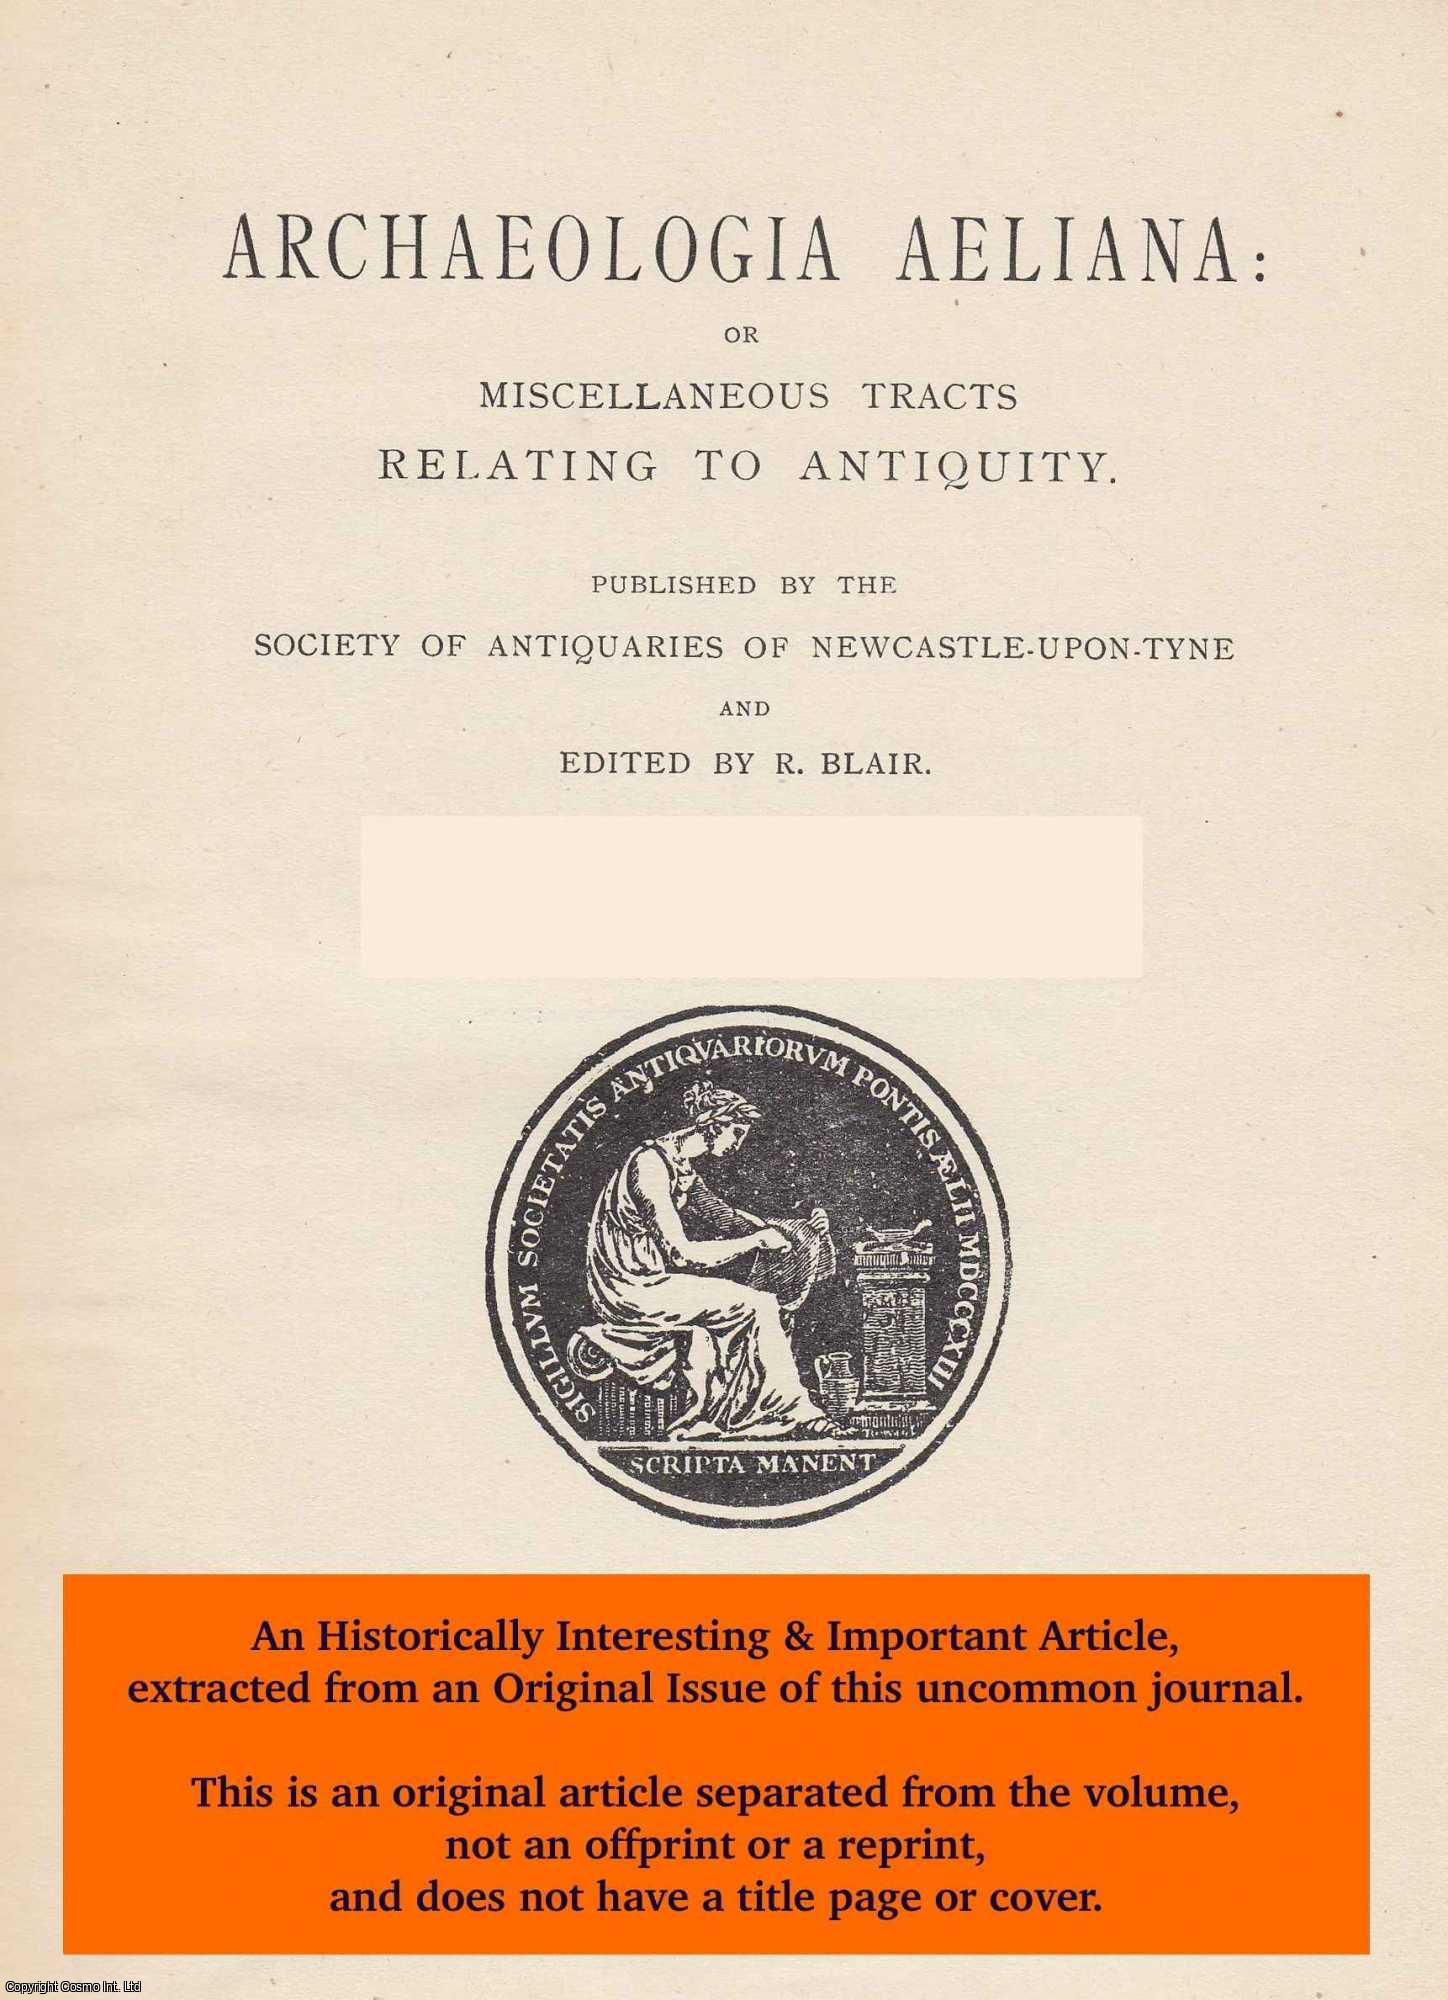 C. H. Hunter Blair, C. H. Hunter - Northern Knights at Falkirk, 1298. An original article from The Archaeologia Aeliana: or Miscellaneous Tracts Relating to Antiquity, 1947.